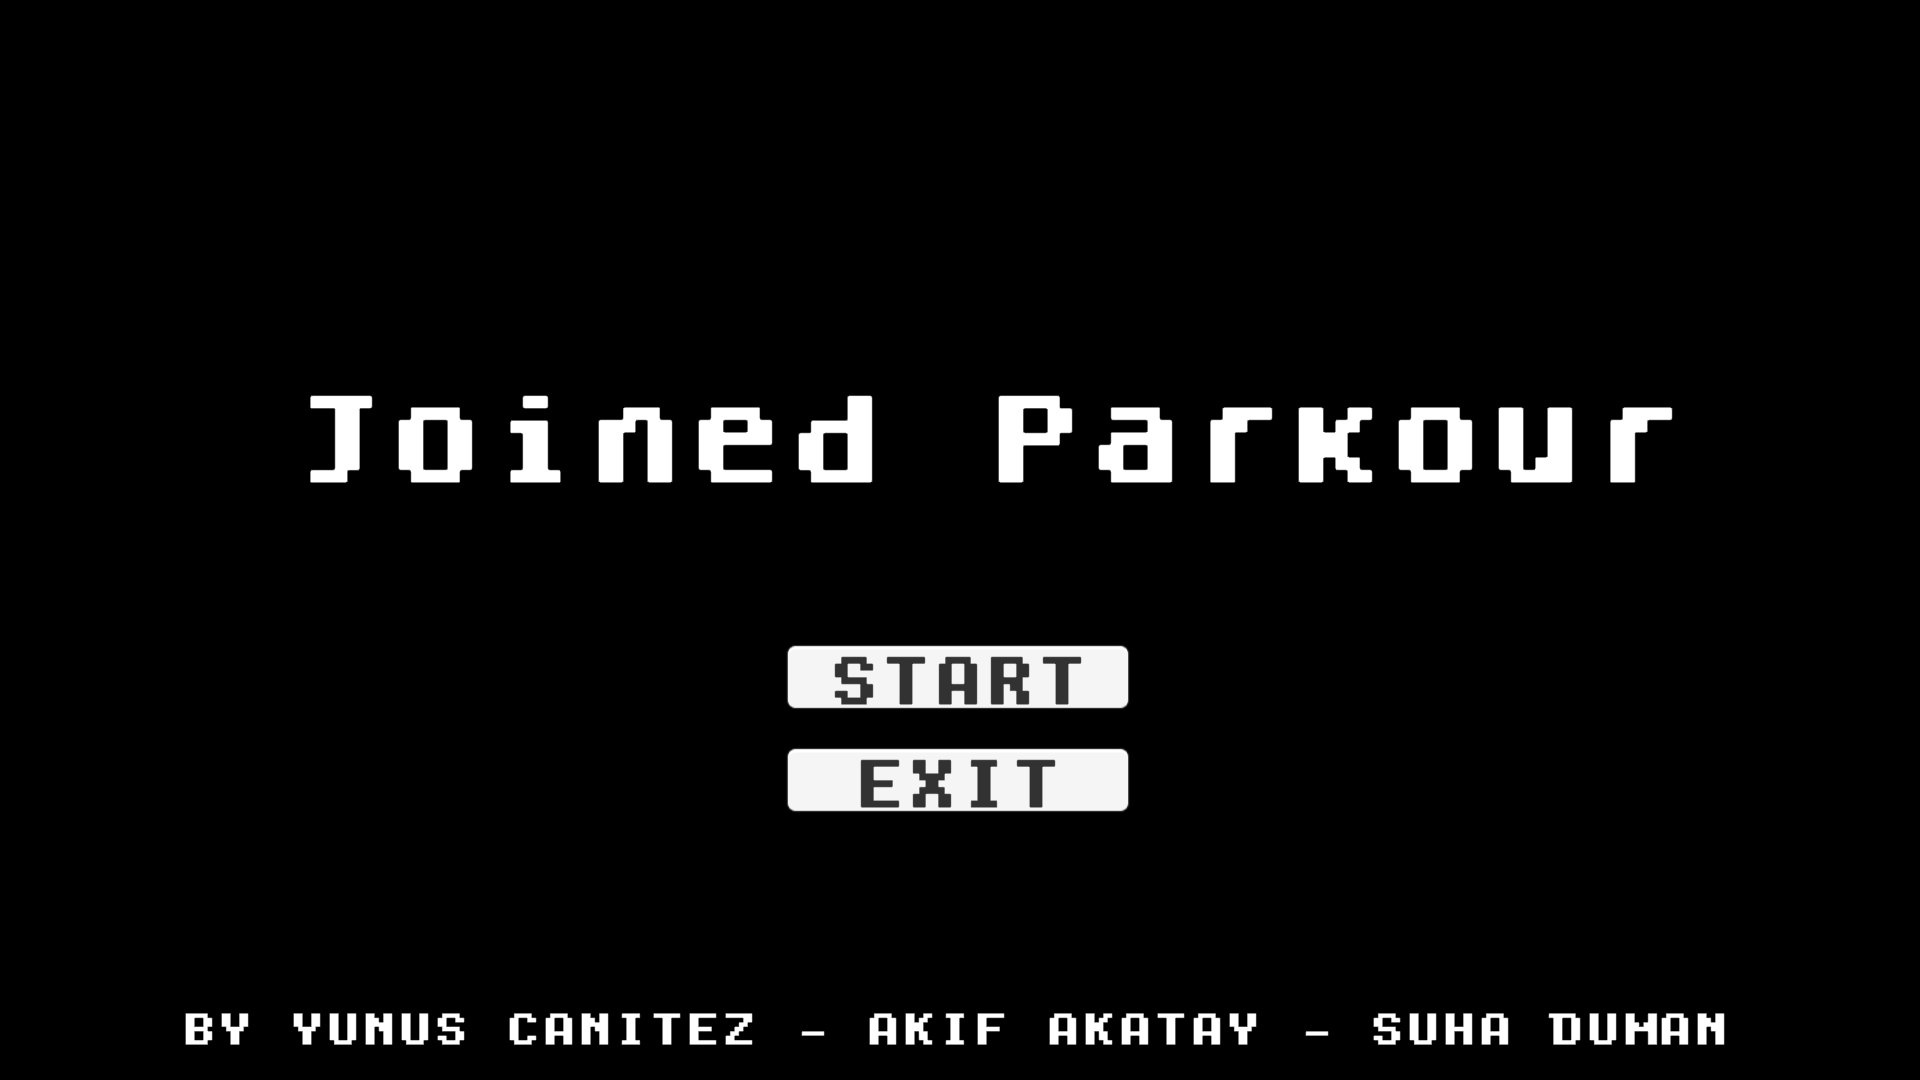 Joined Parkour